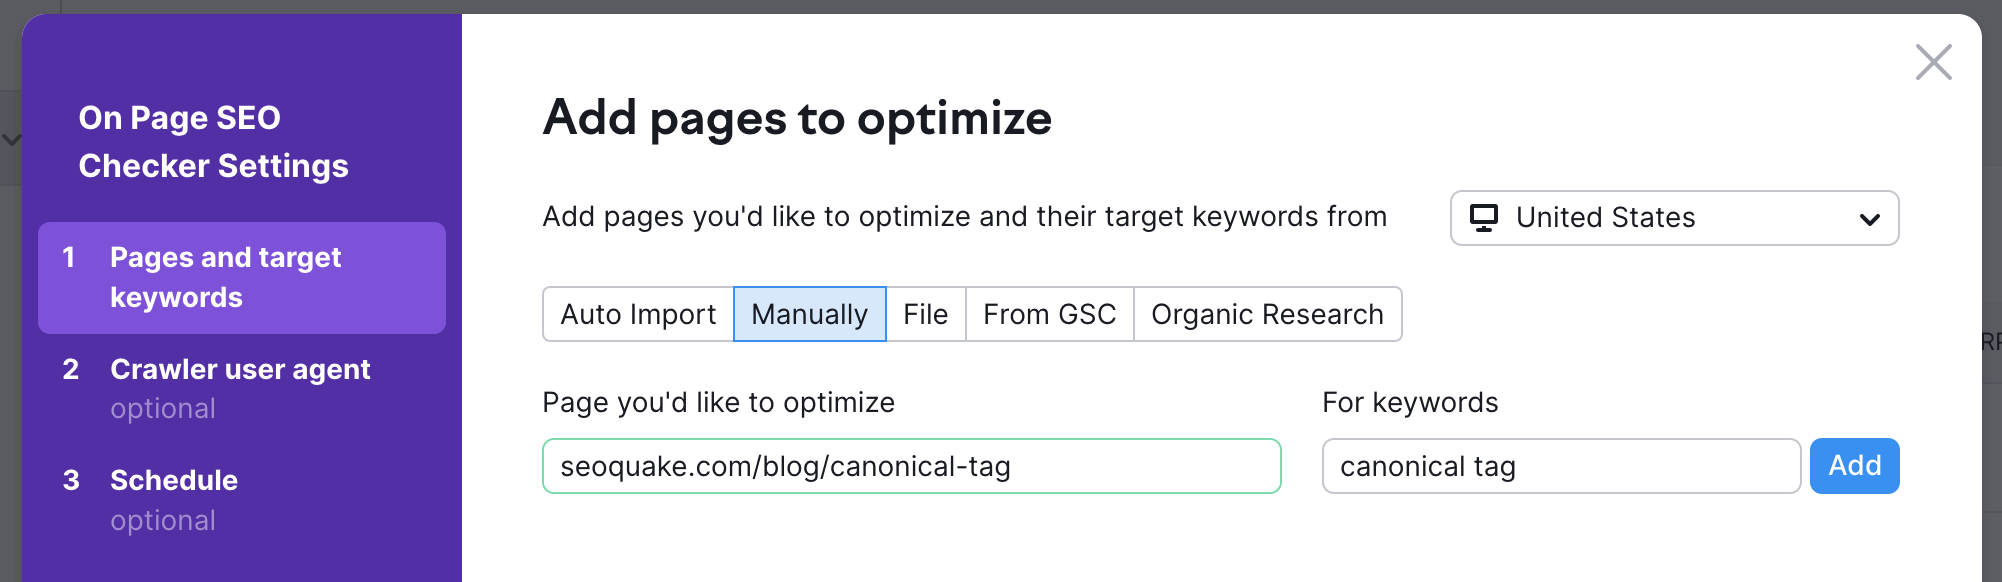 add pages to optimize